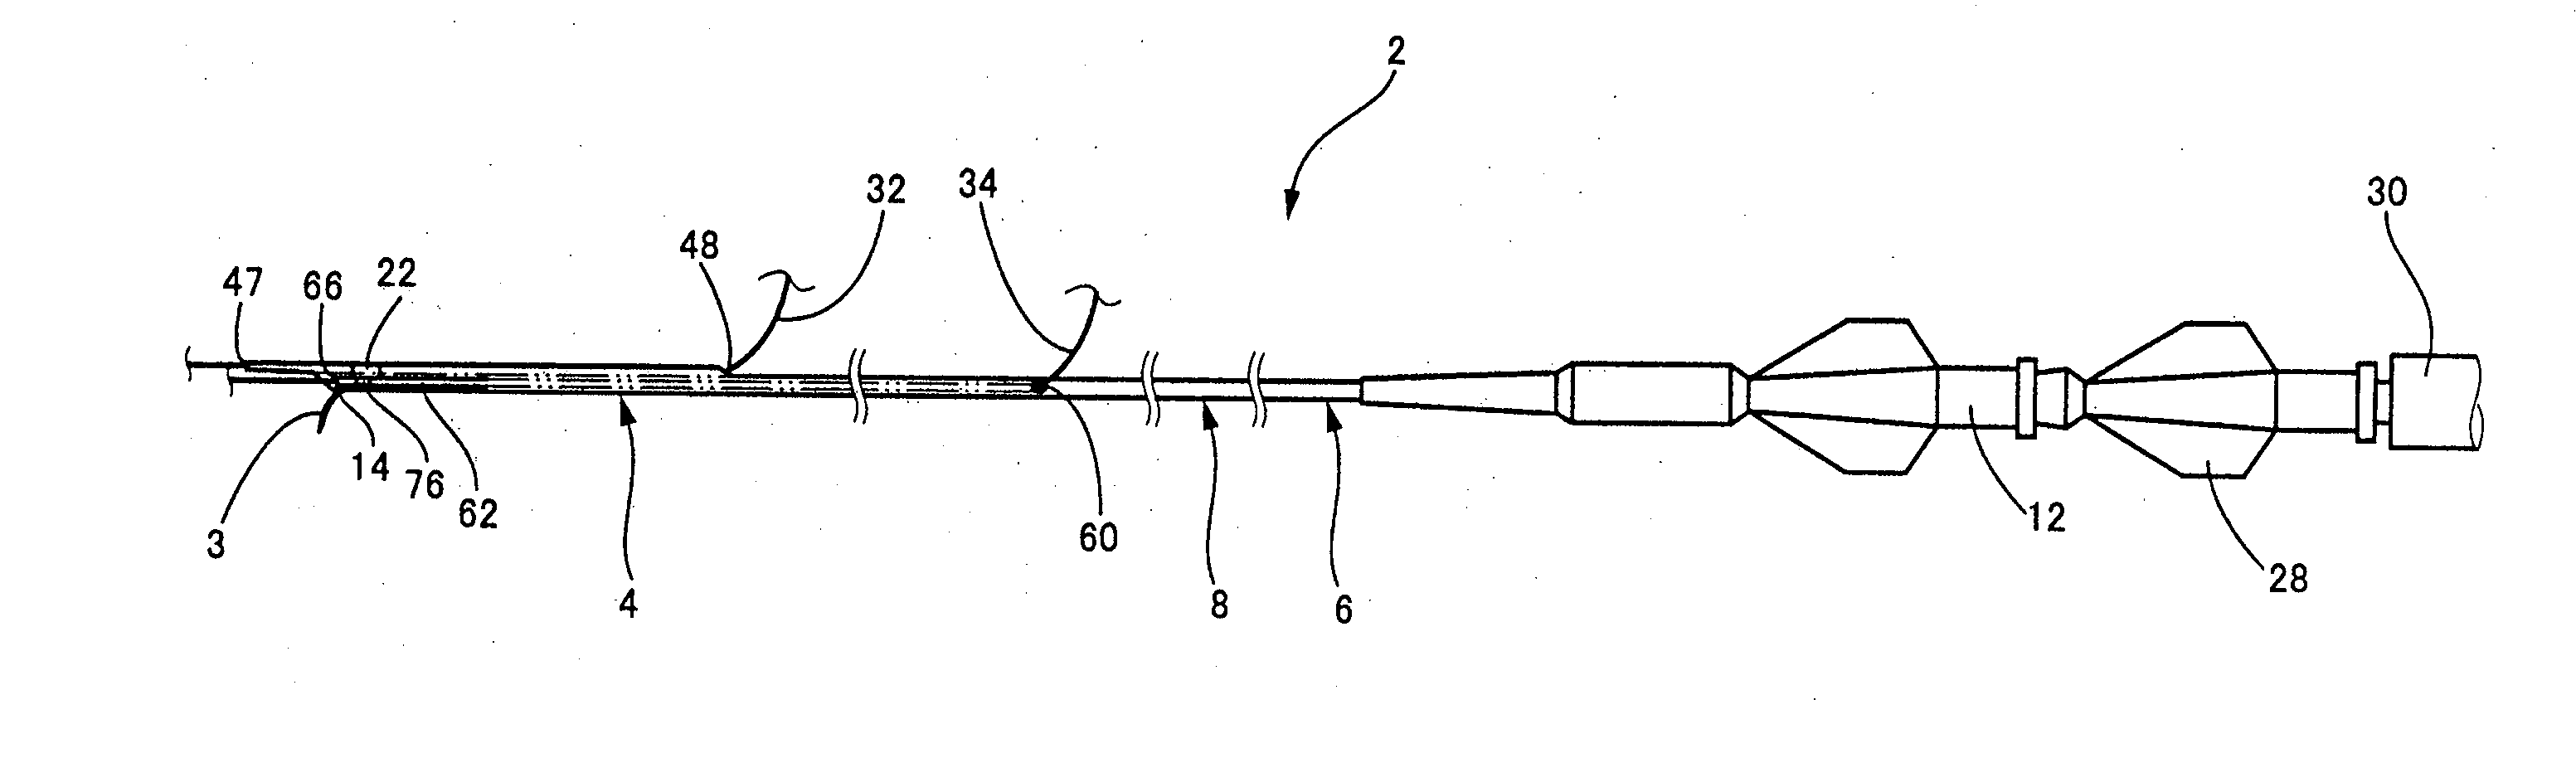 Reagent injection apparatus and method of producing the same